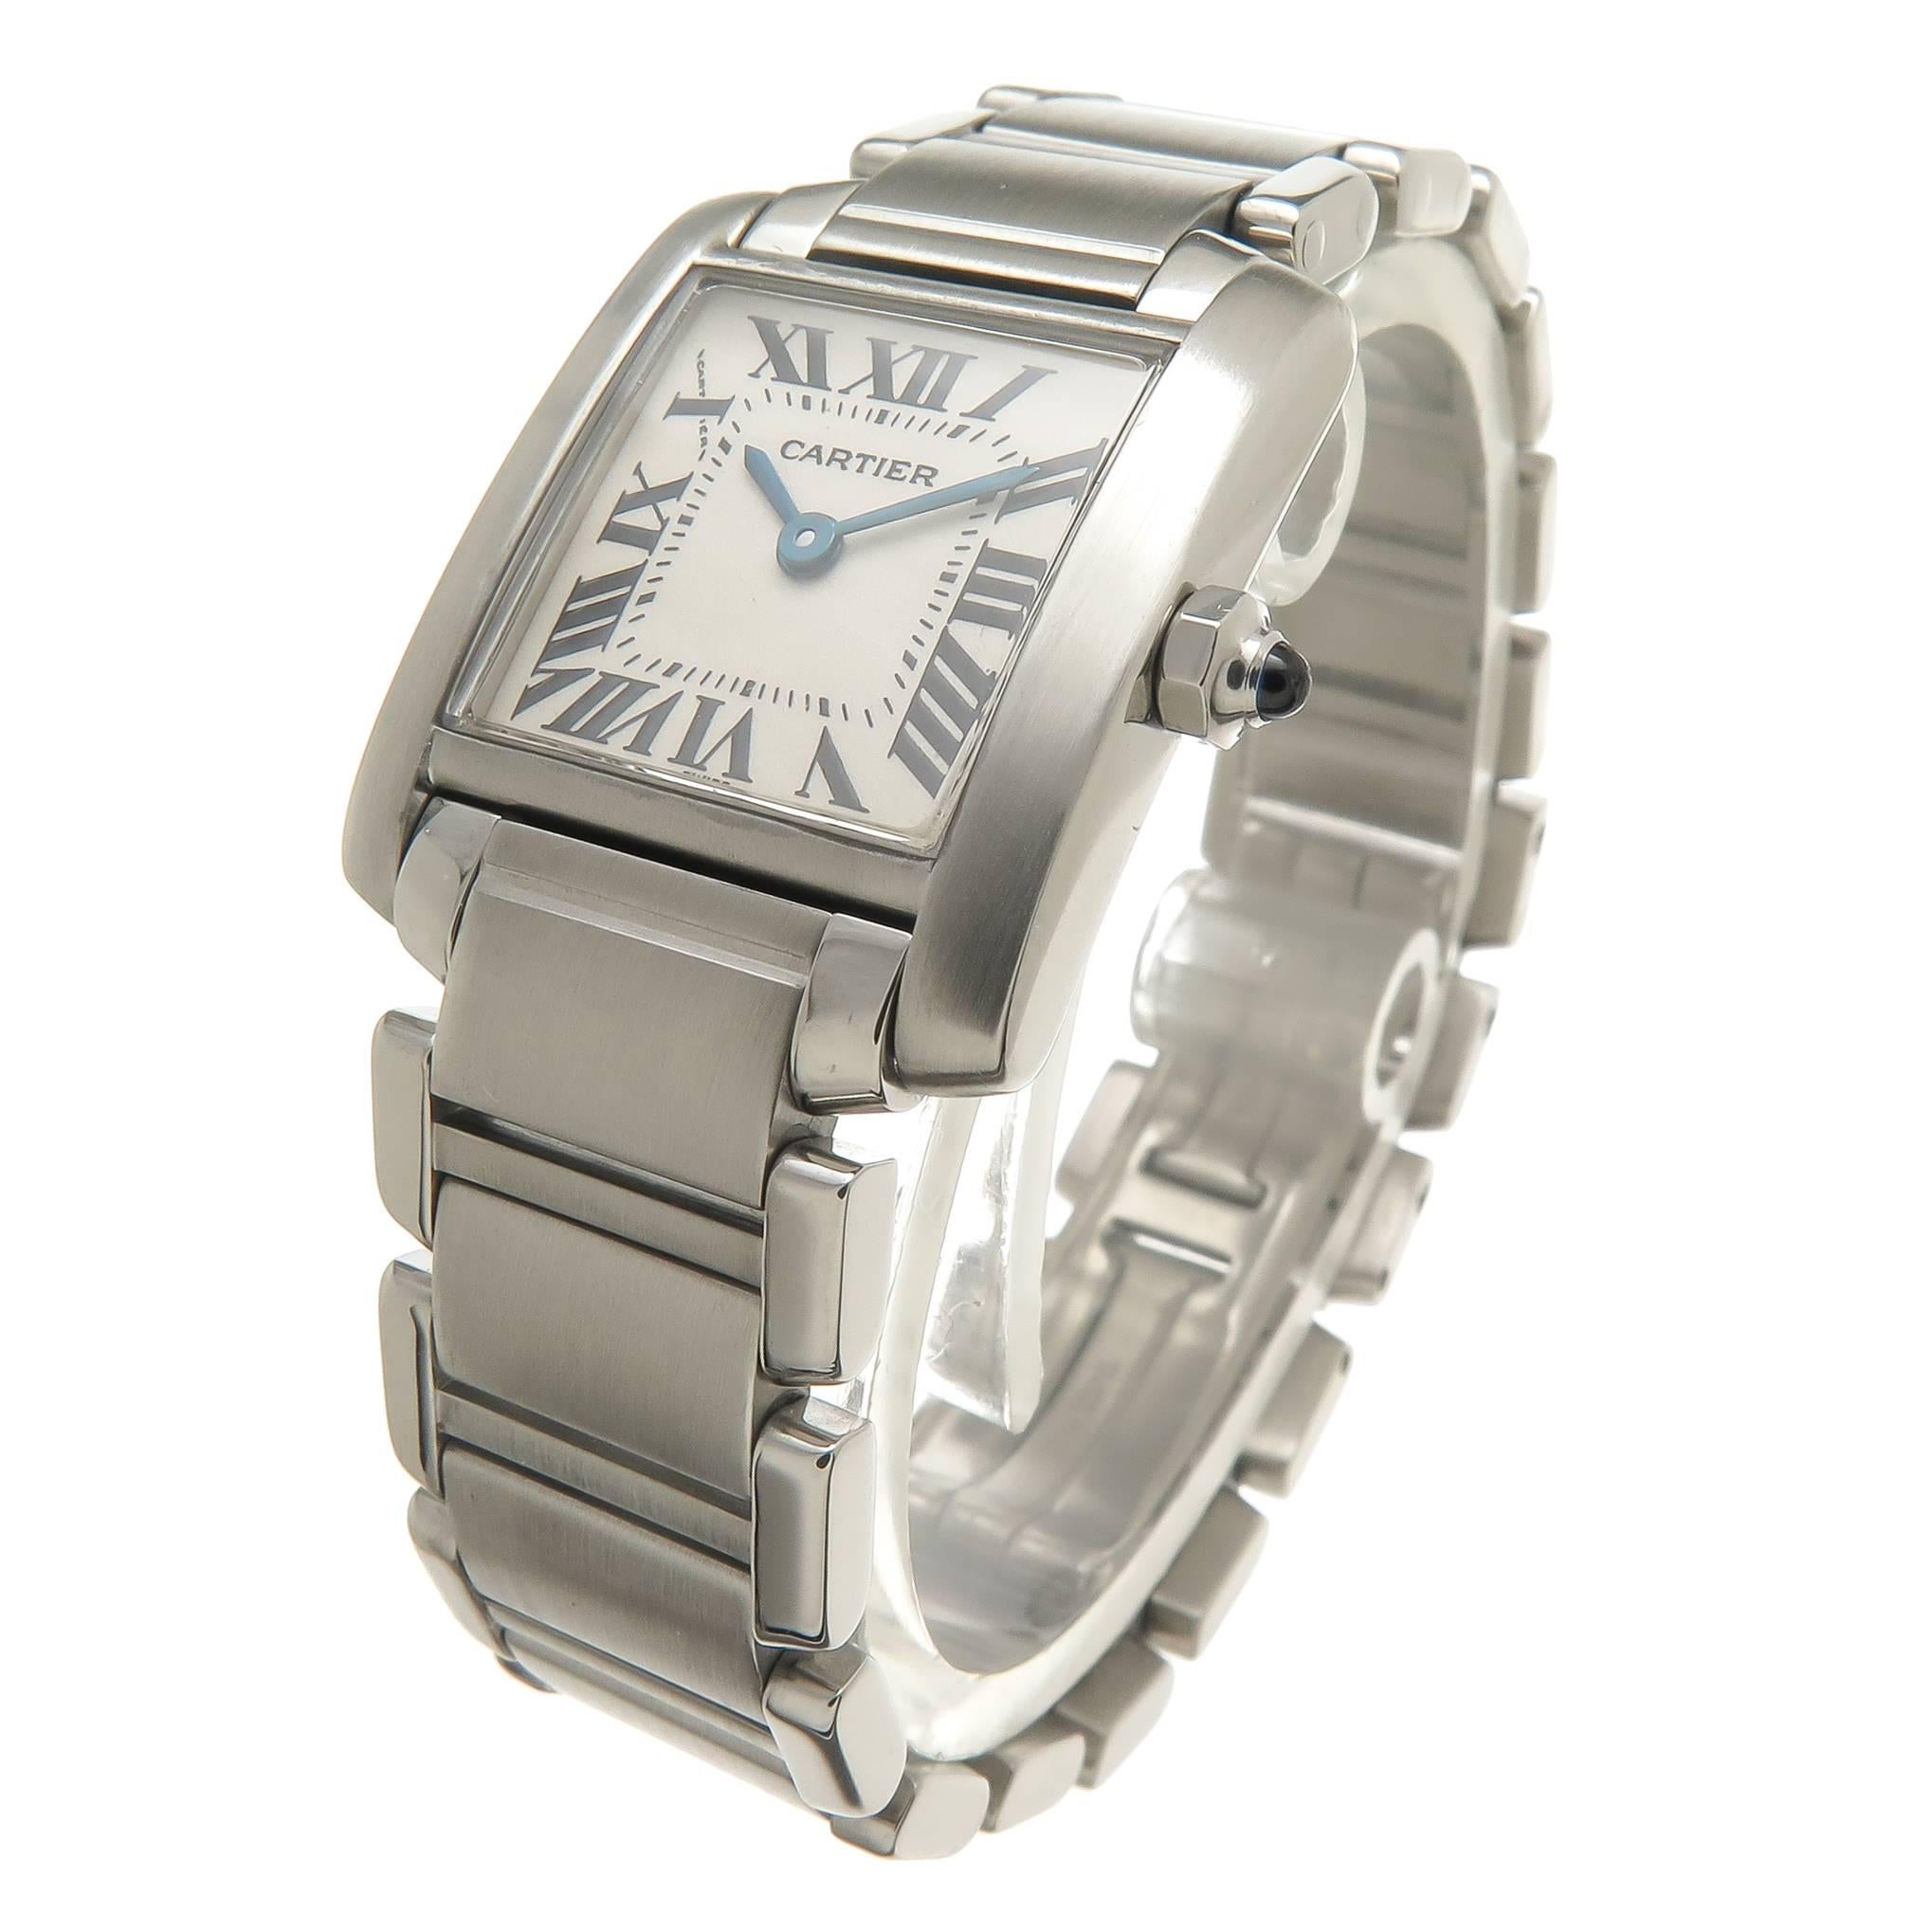 Circa 2010 Cartier Tank Francaise Wrist watch, 24 X 20 Stainless Steel water resistant Case, Quartz Movement. White Dial with Black Roman Numerals, sapphire Crown. 5/8 inch wide Steel Bracelet with deployment clasp. Total Length 6 1/2 inch.